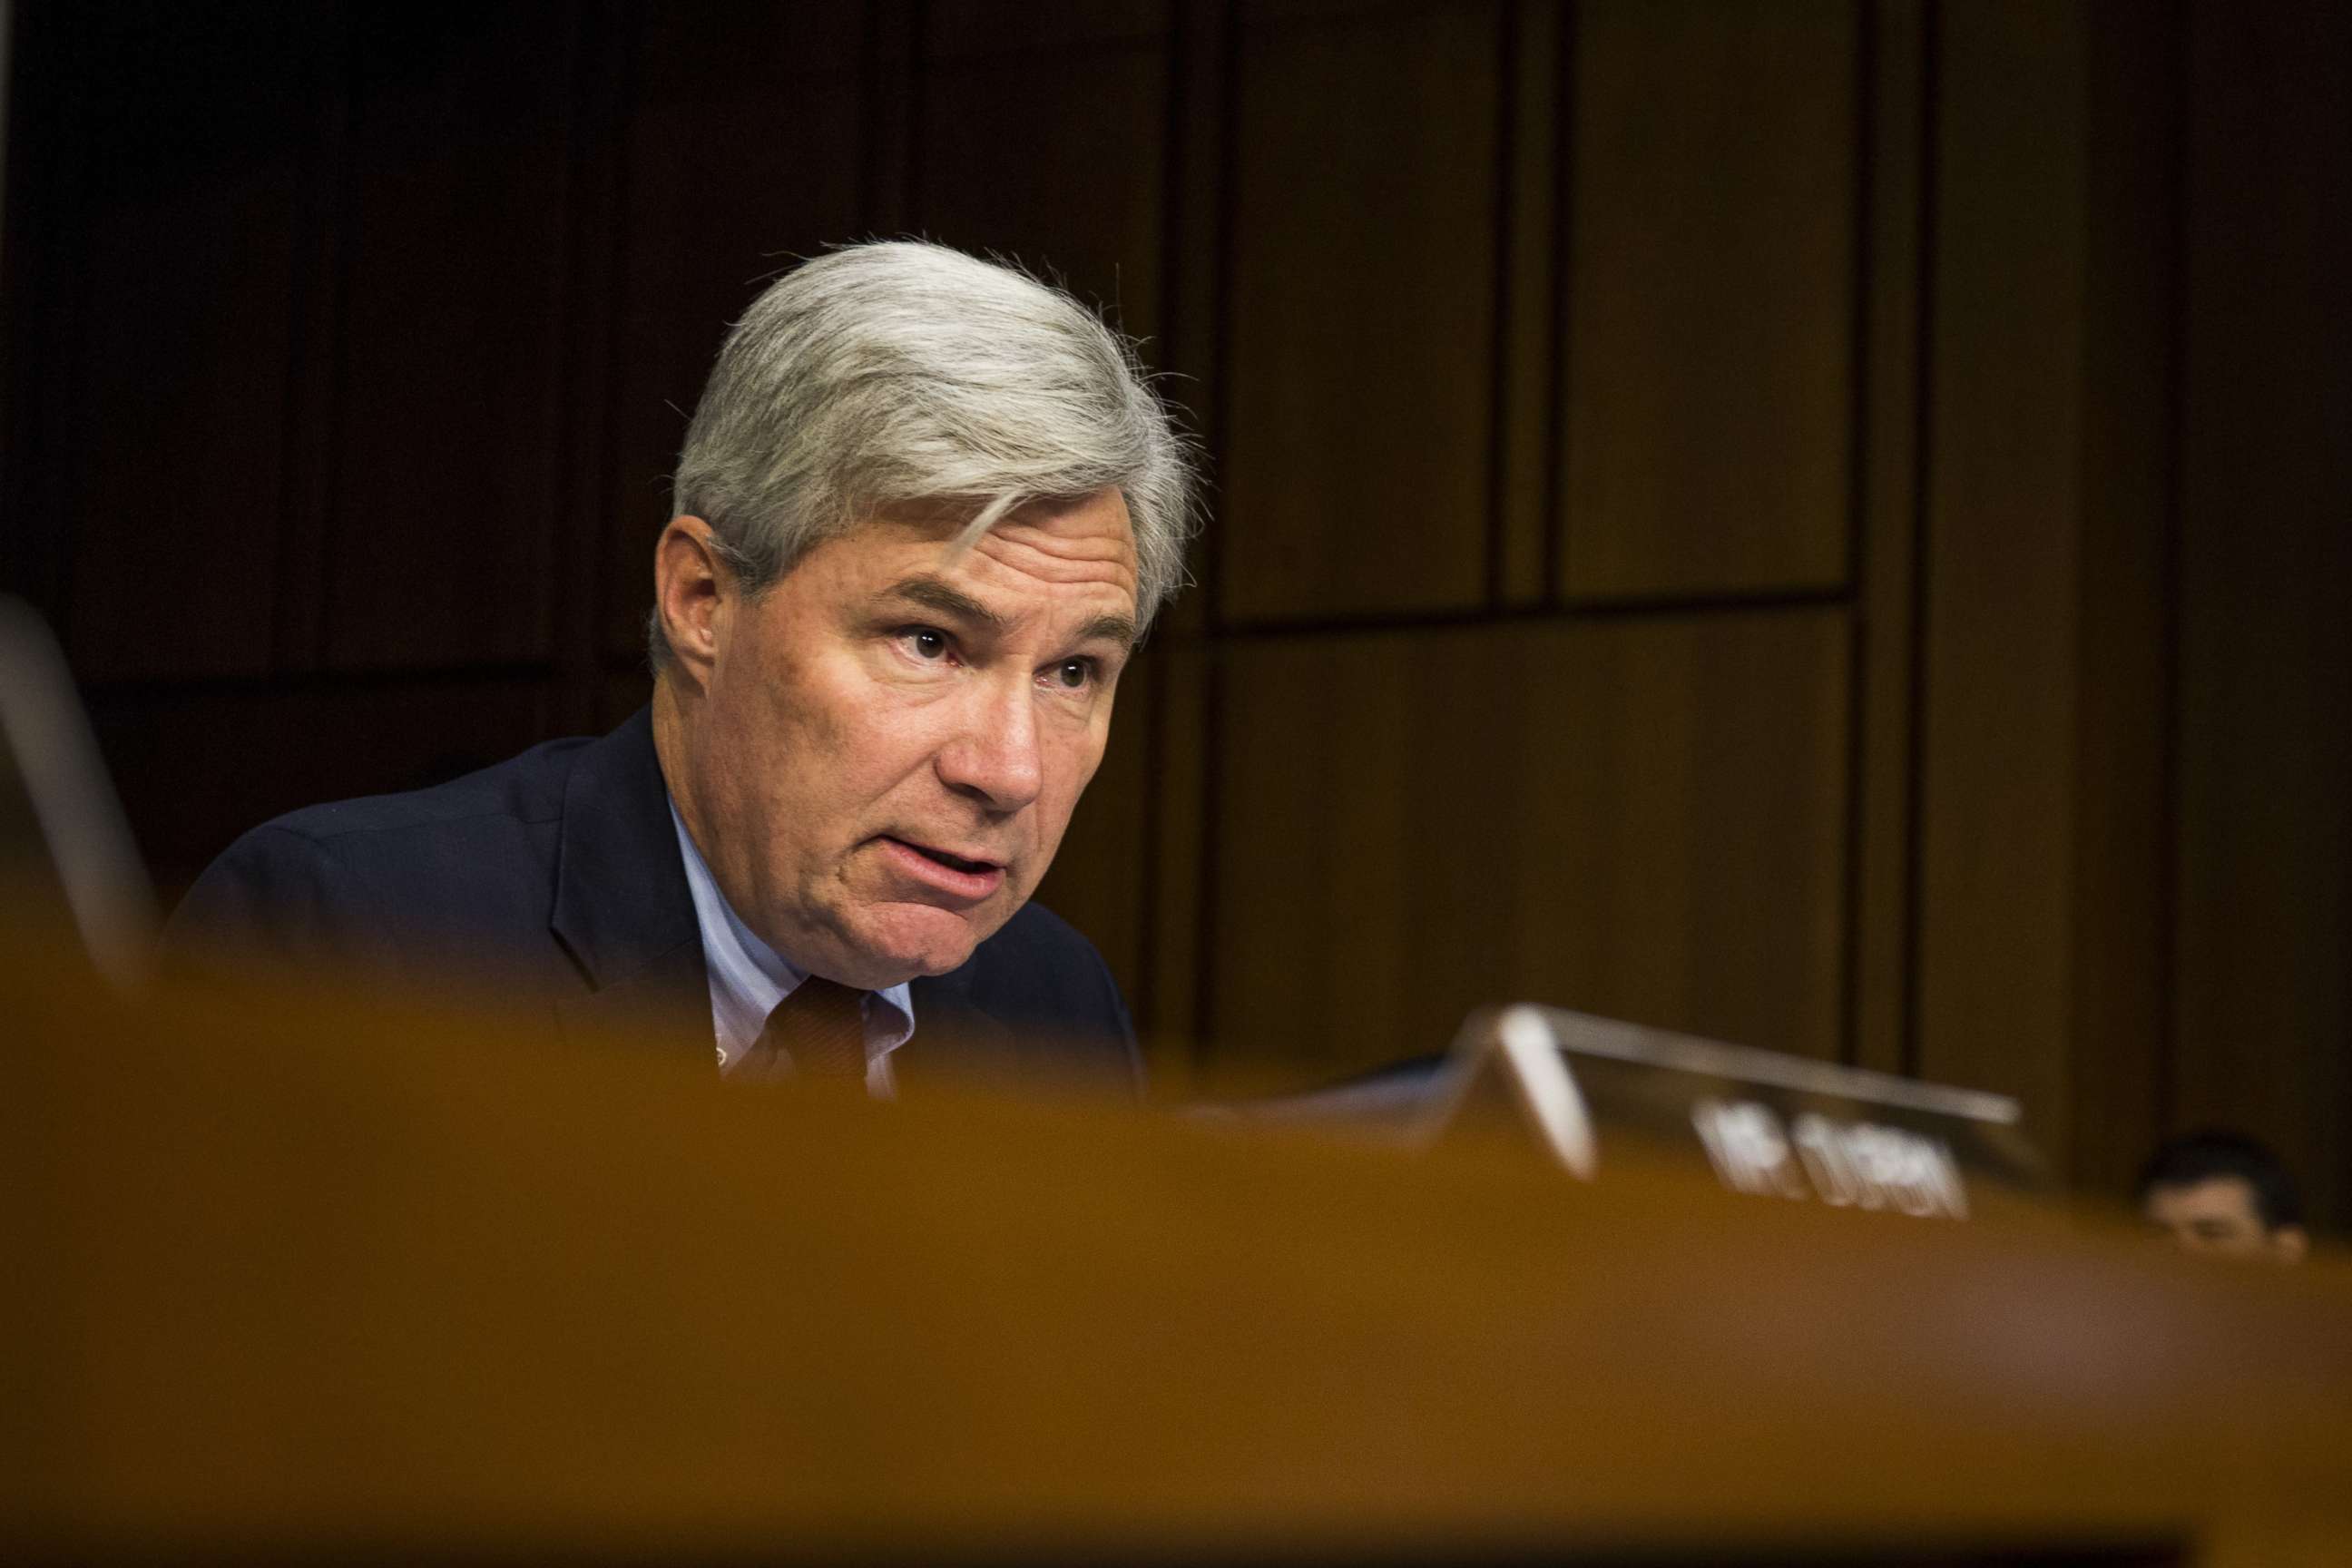 PHOTO: Senator Sheldon Whitehouse (D) R.I., speaks during a Senate Judiciary Committee hearing with Jeff Sessions, not pictured, in Washington, D.C., Oct. 18, 2017.